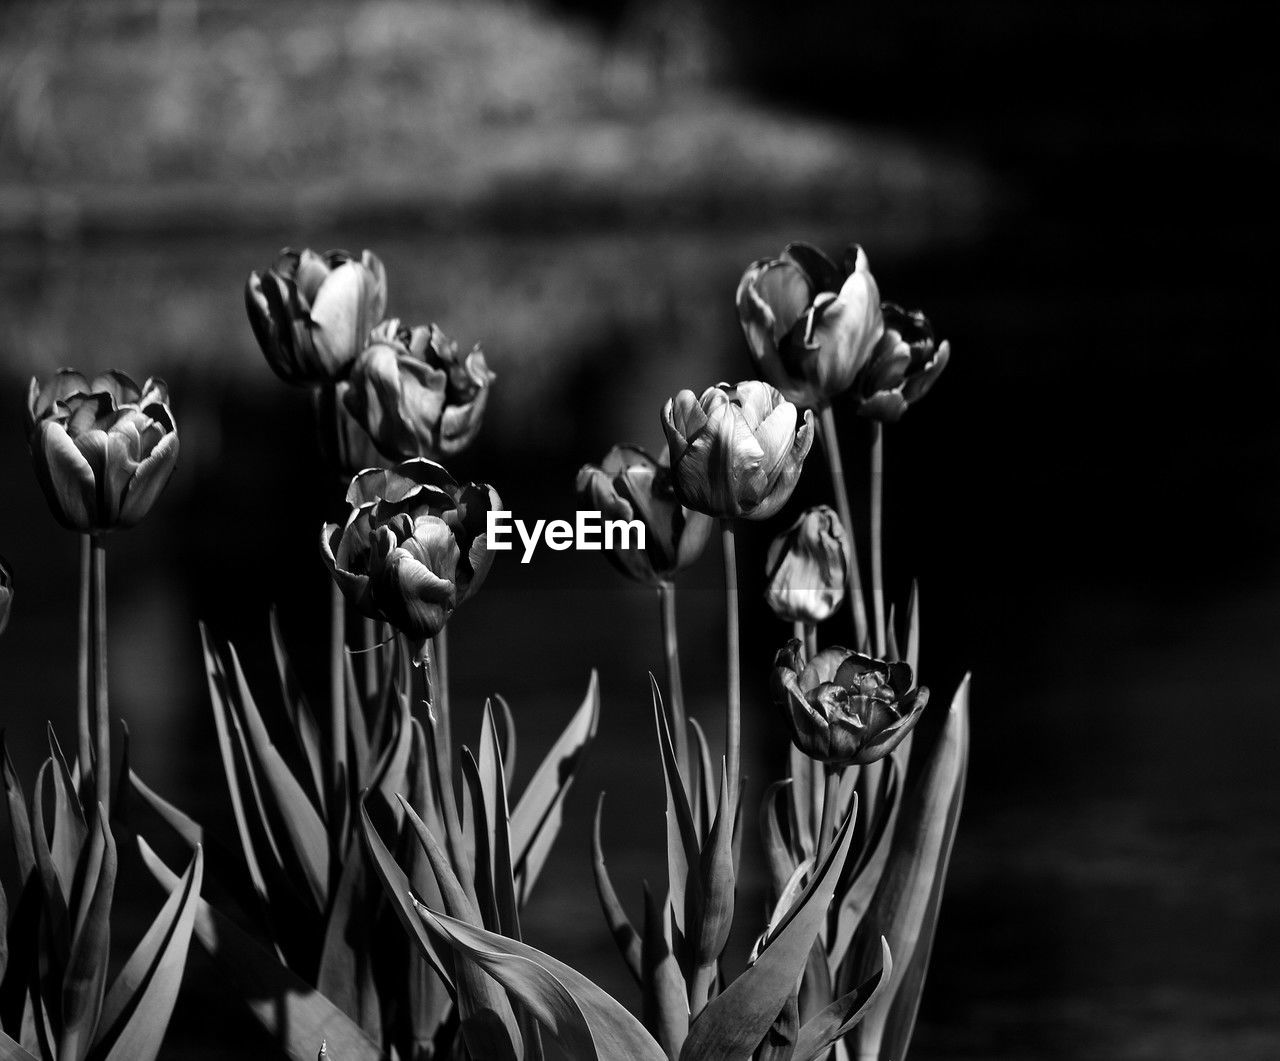 black and white, black, monochrome photography, monochrome, flower, flowering plant, darkness, plant, still life photography, close-up, no people, freshness, nature, macro photography, beauty in nature, focus on foreground, white, fragility, growth, flower head